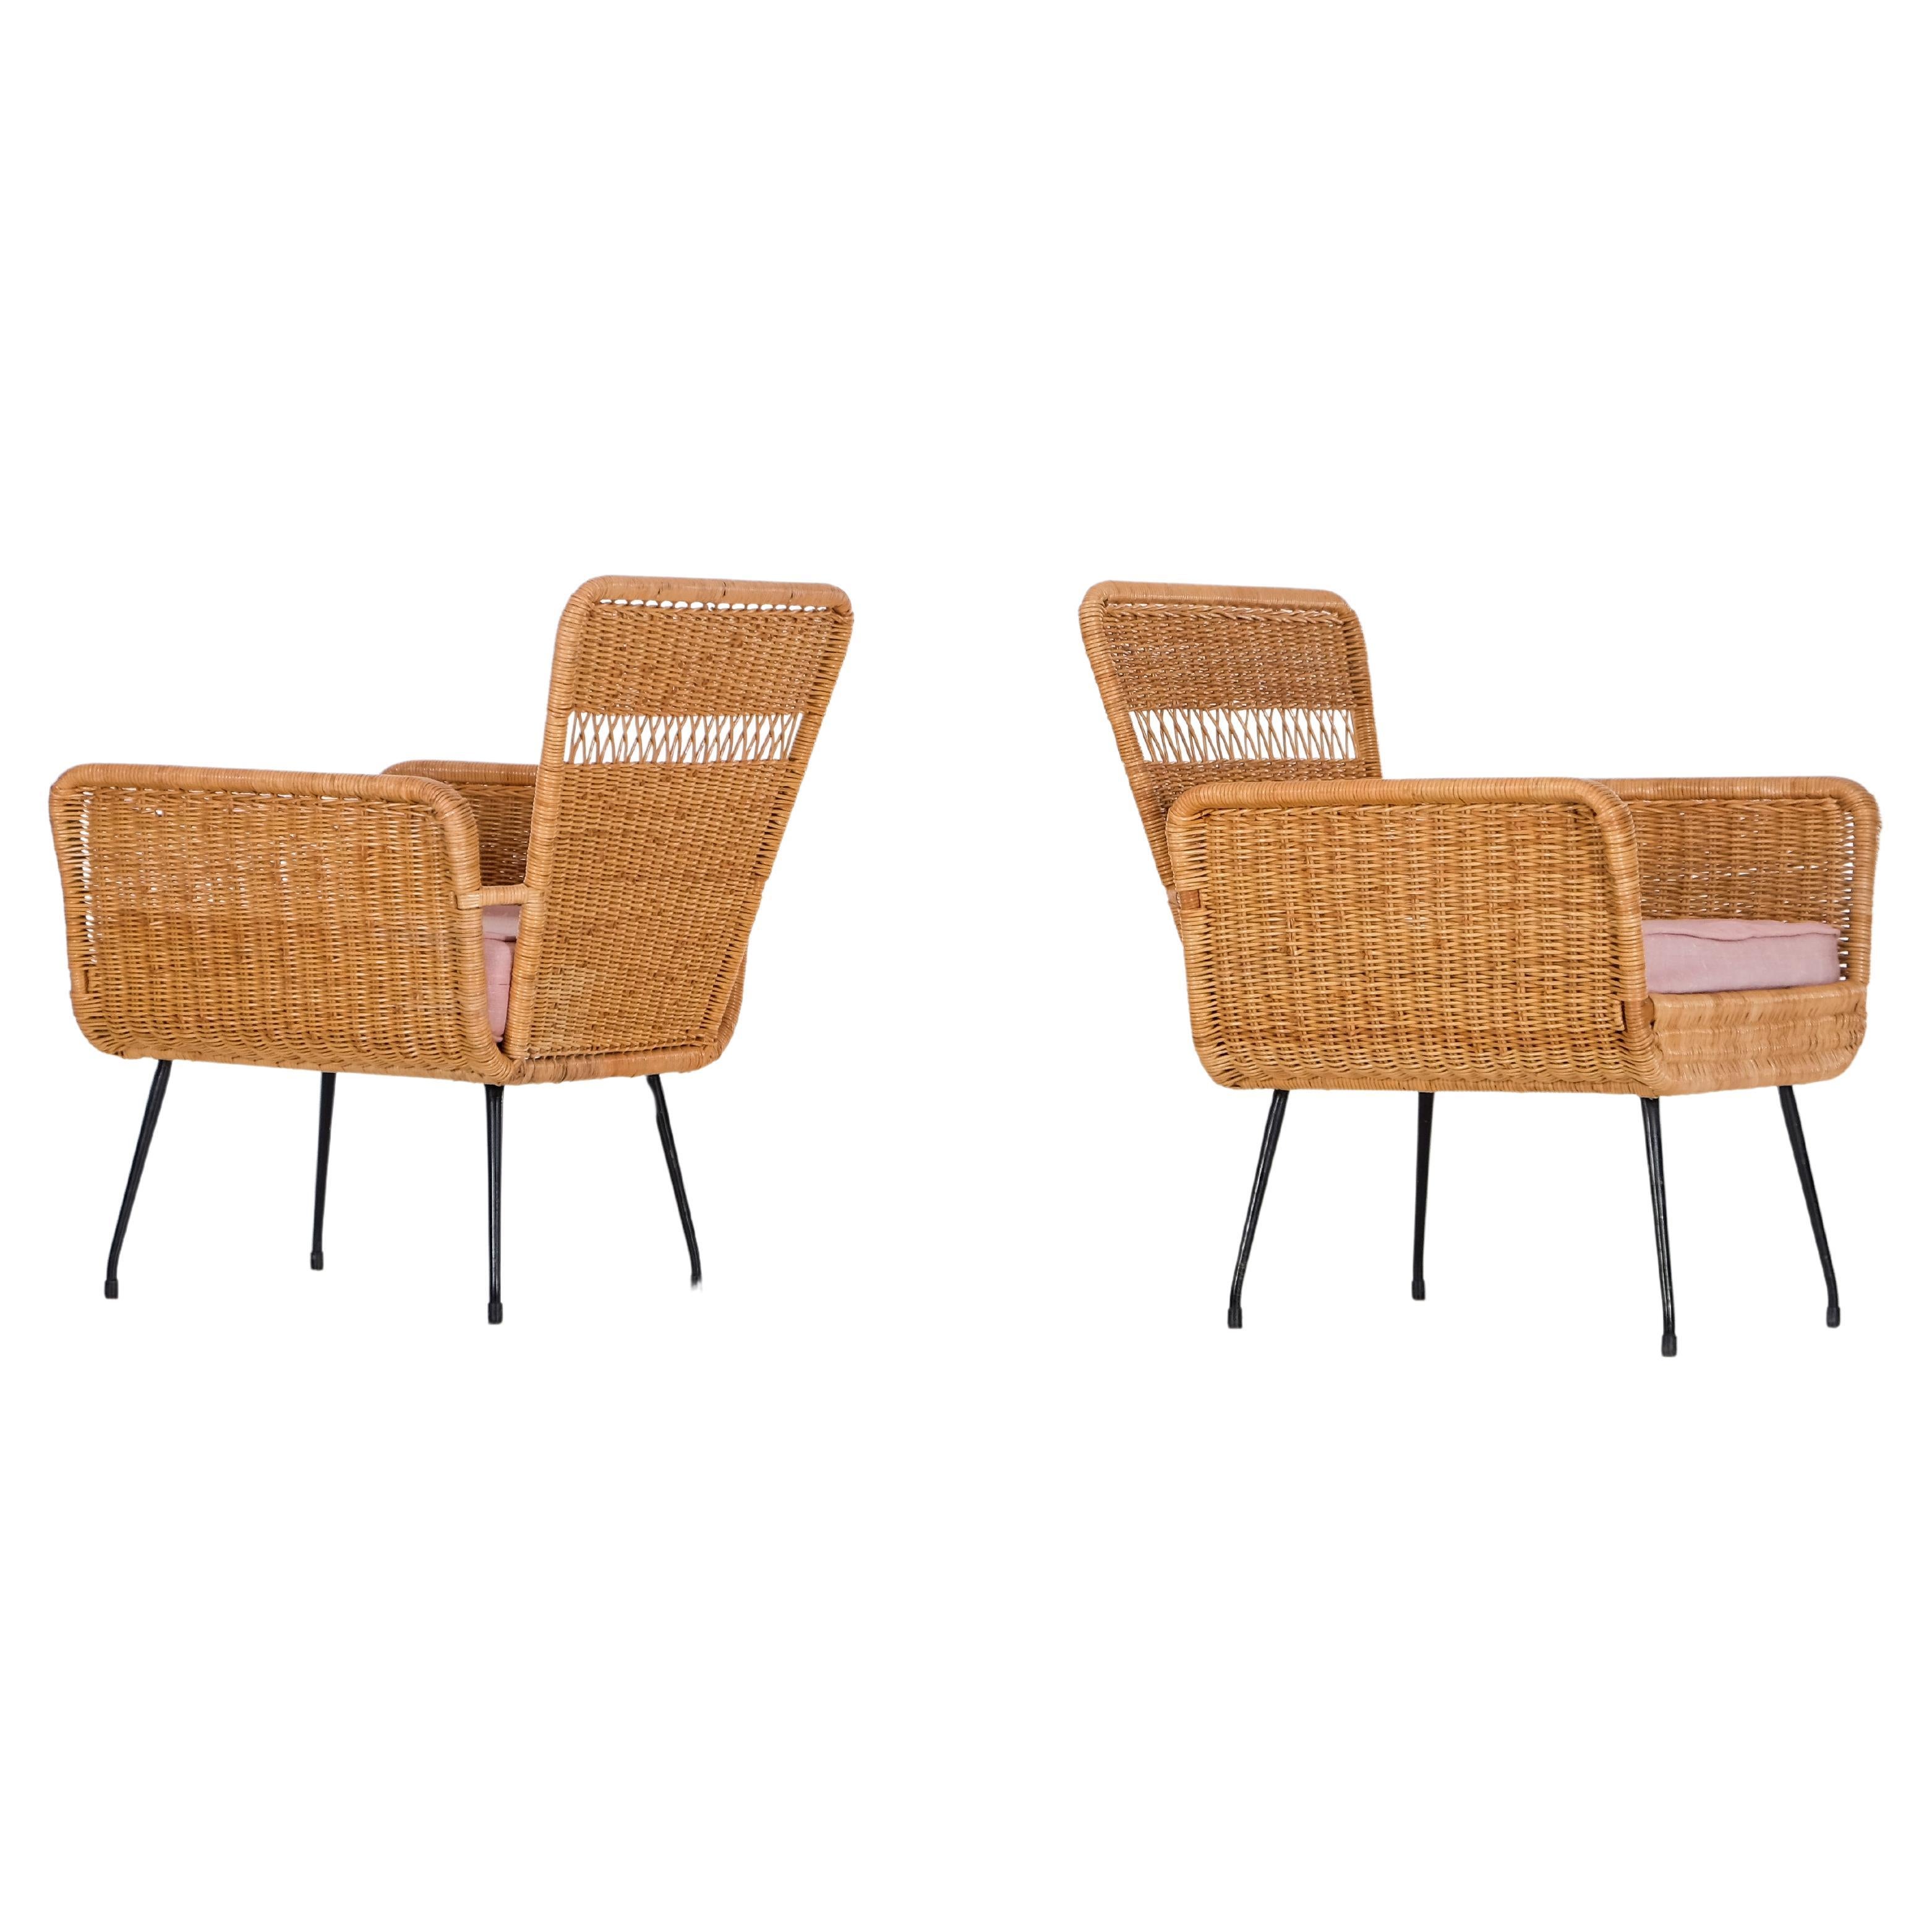 Pair of rattan armchairs, Brazil, 1960s For Sale